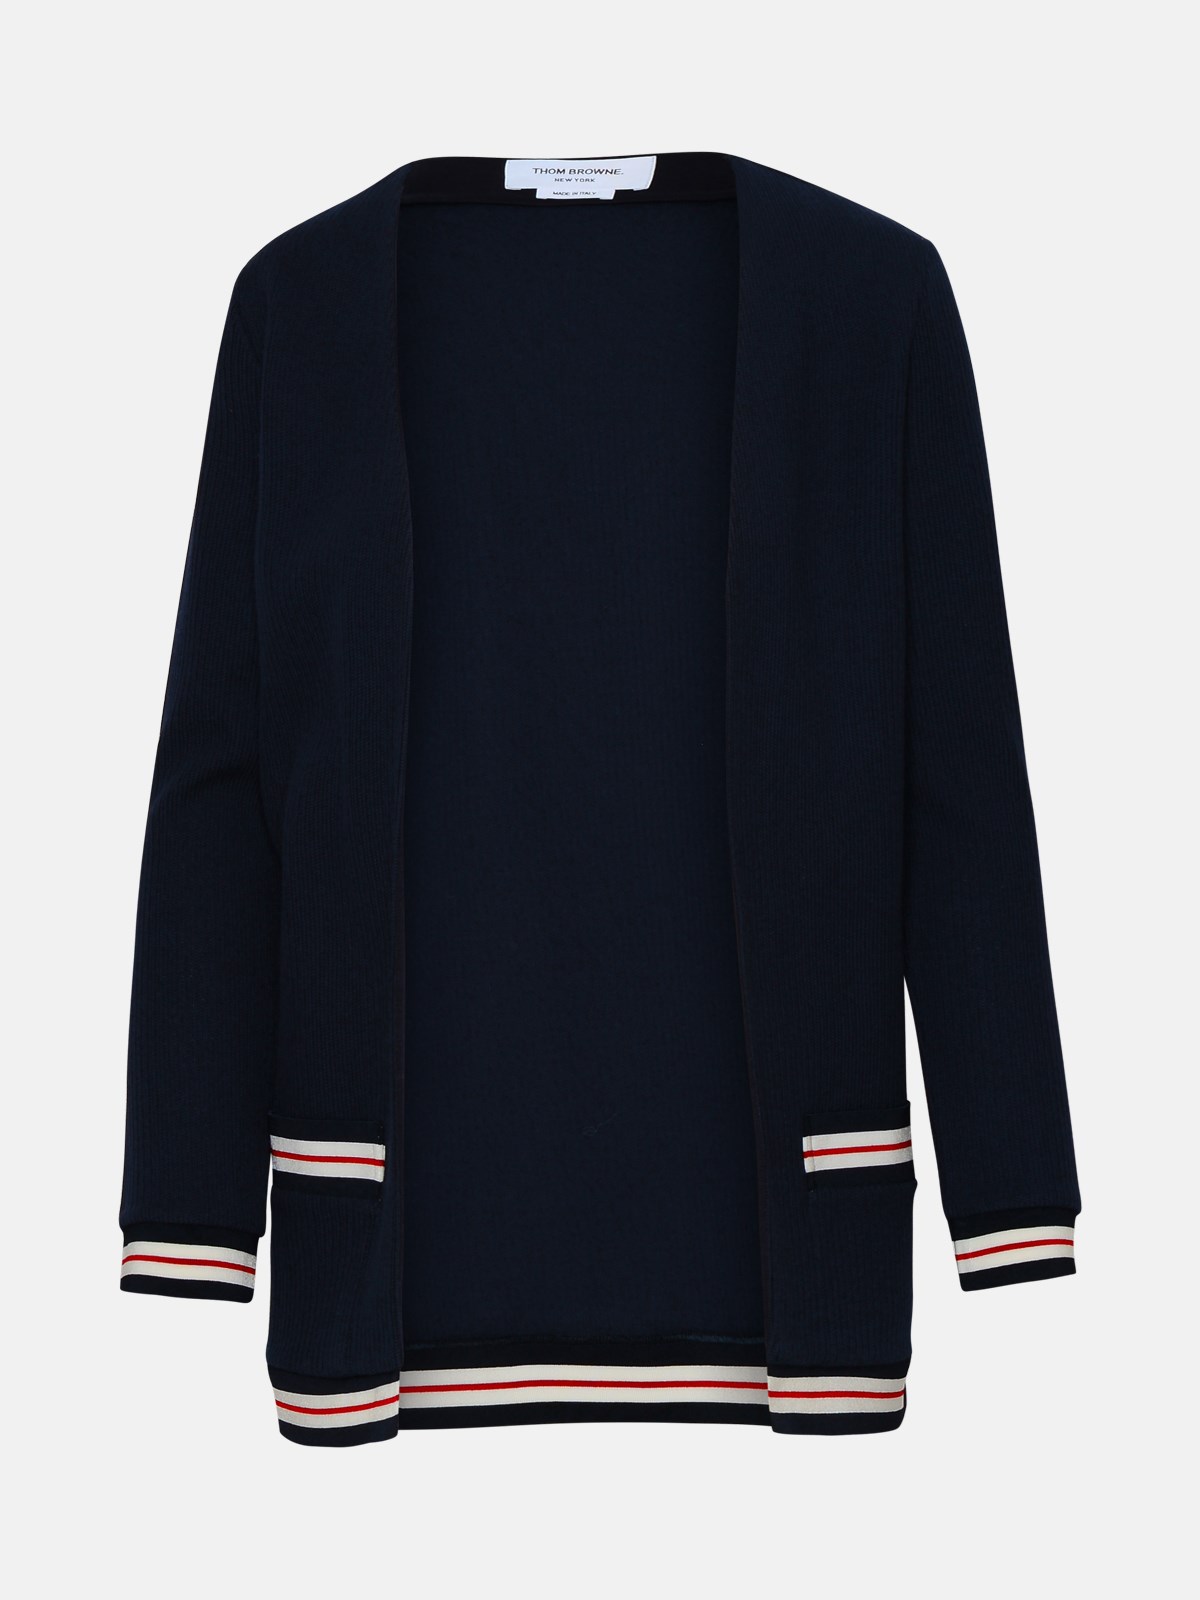 Thom Browne Blue Cotton Cardigan In Navy